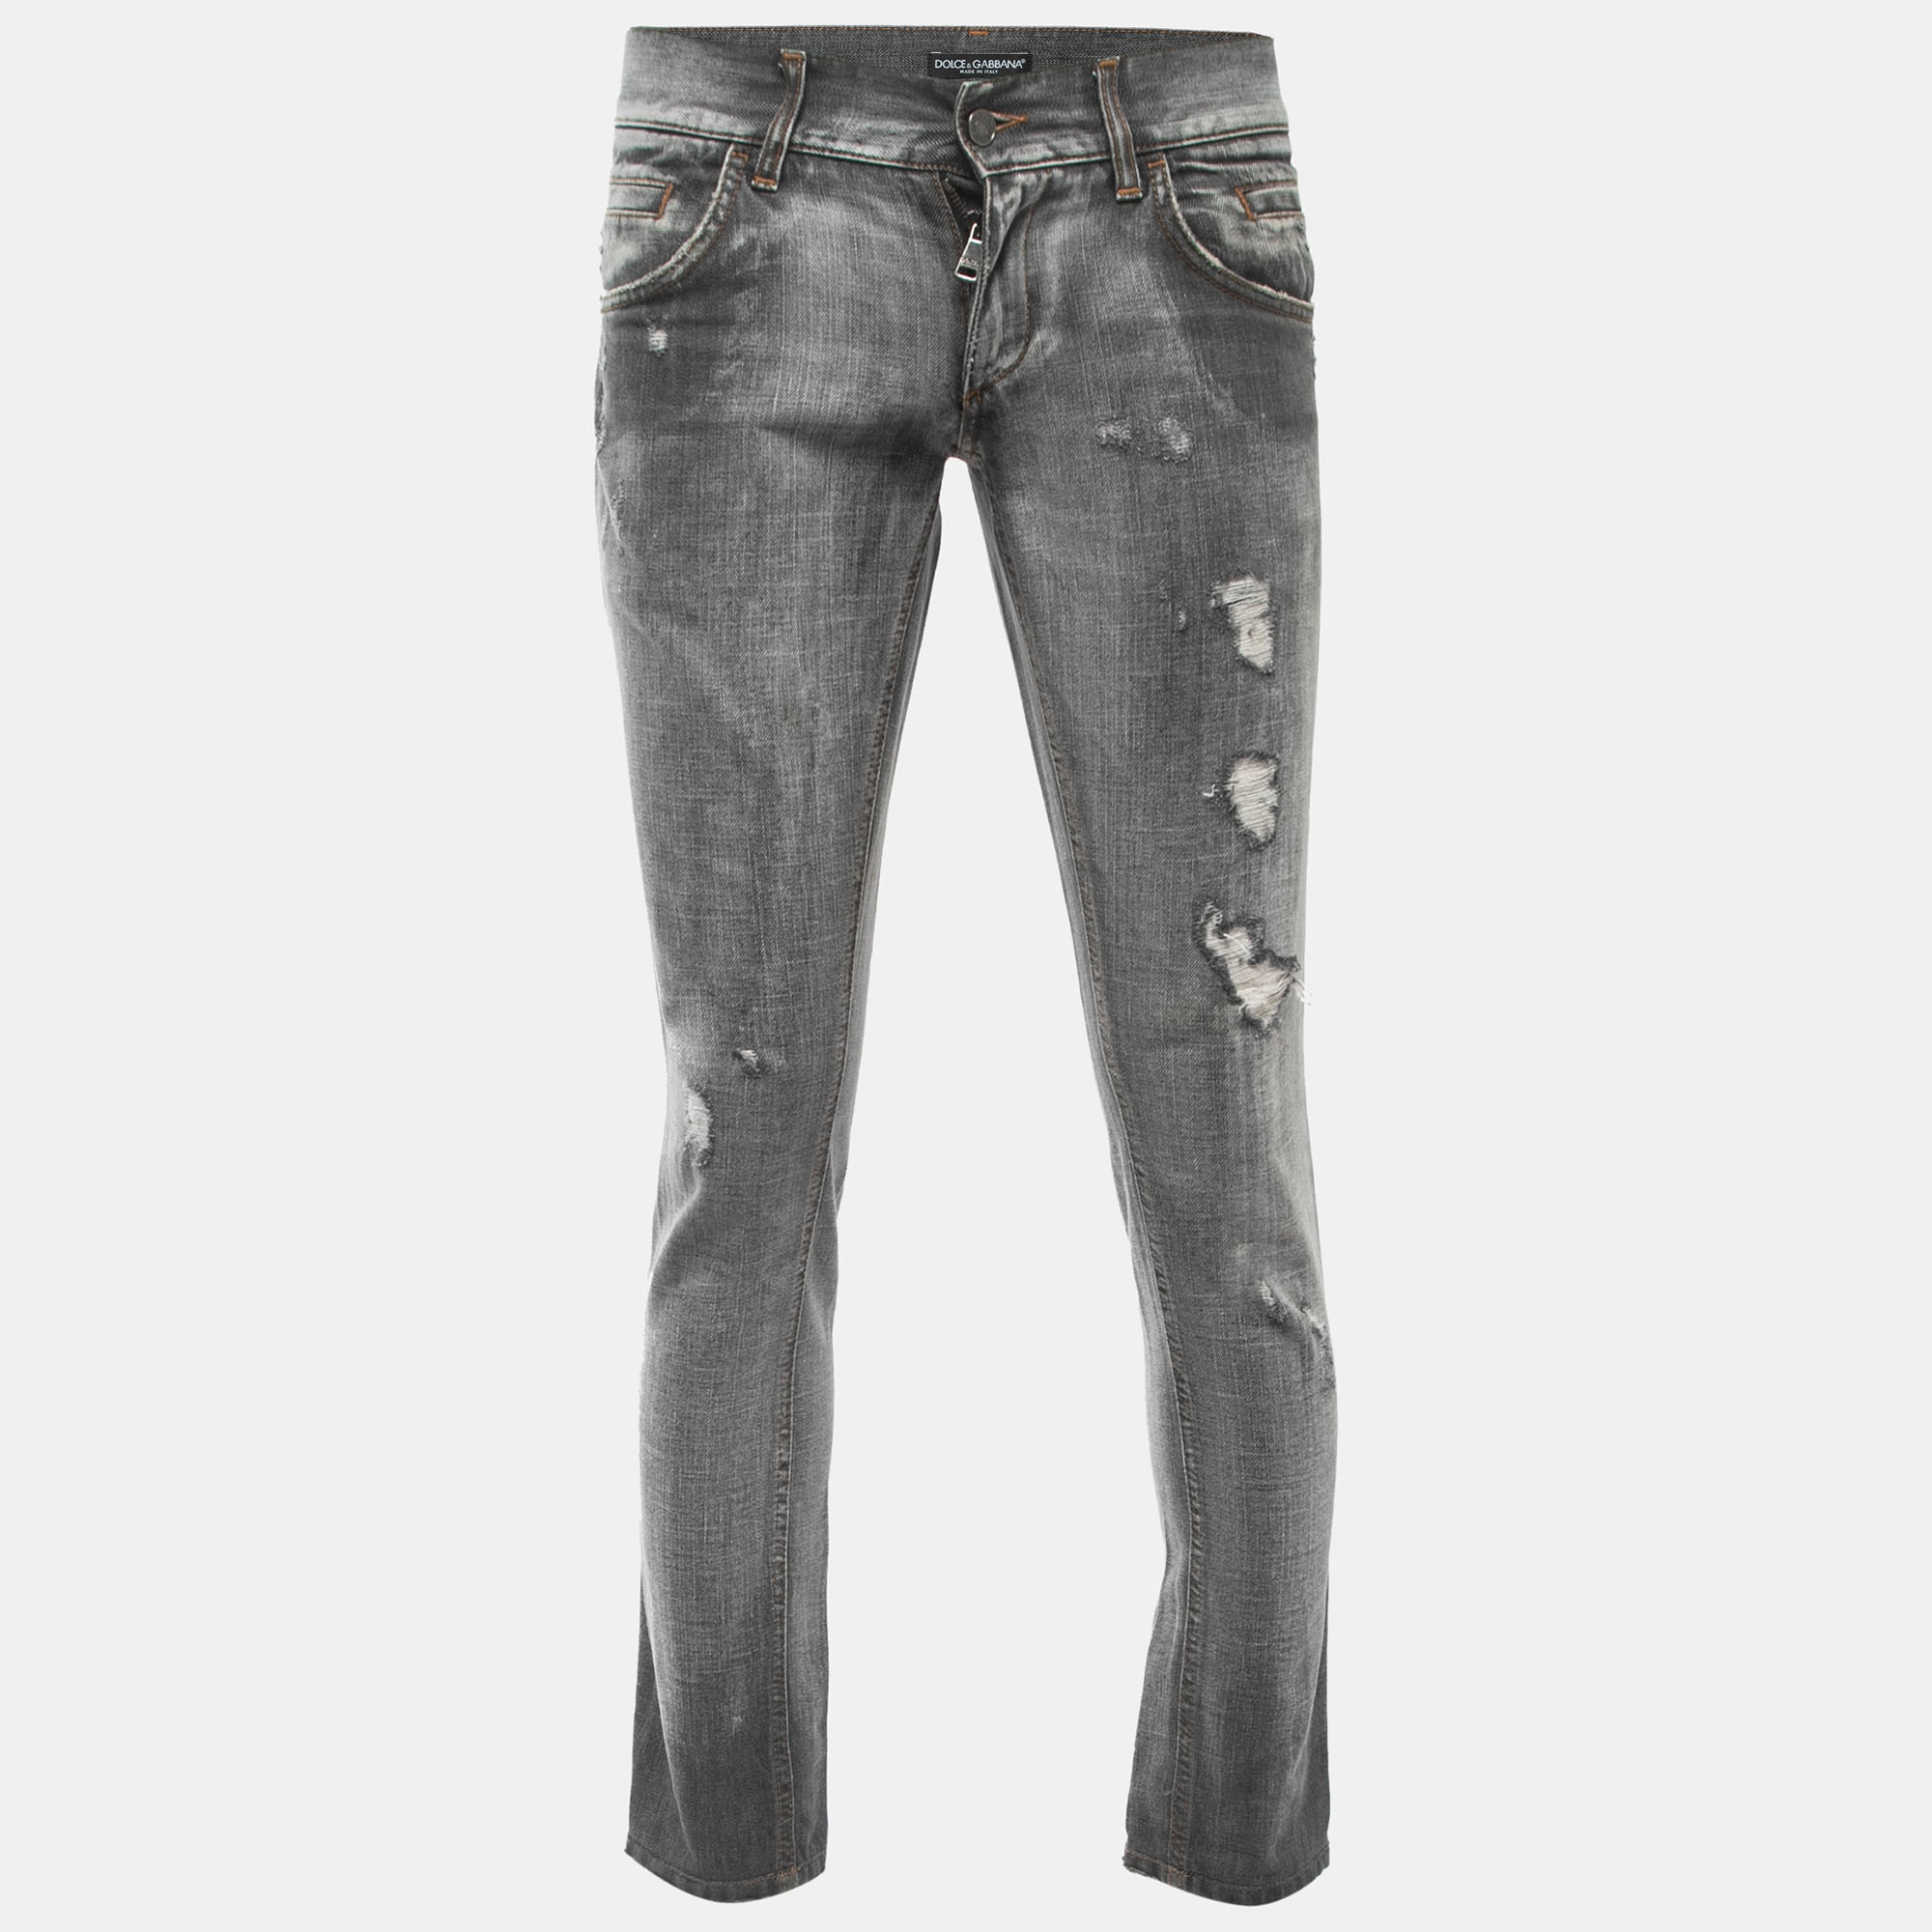 Pre-owned Dolce & Gabbana Grey Washed & Distressed Denim Jeans L Waist 32" In Metallic